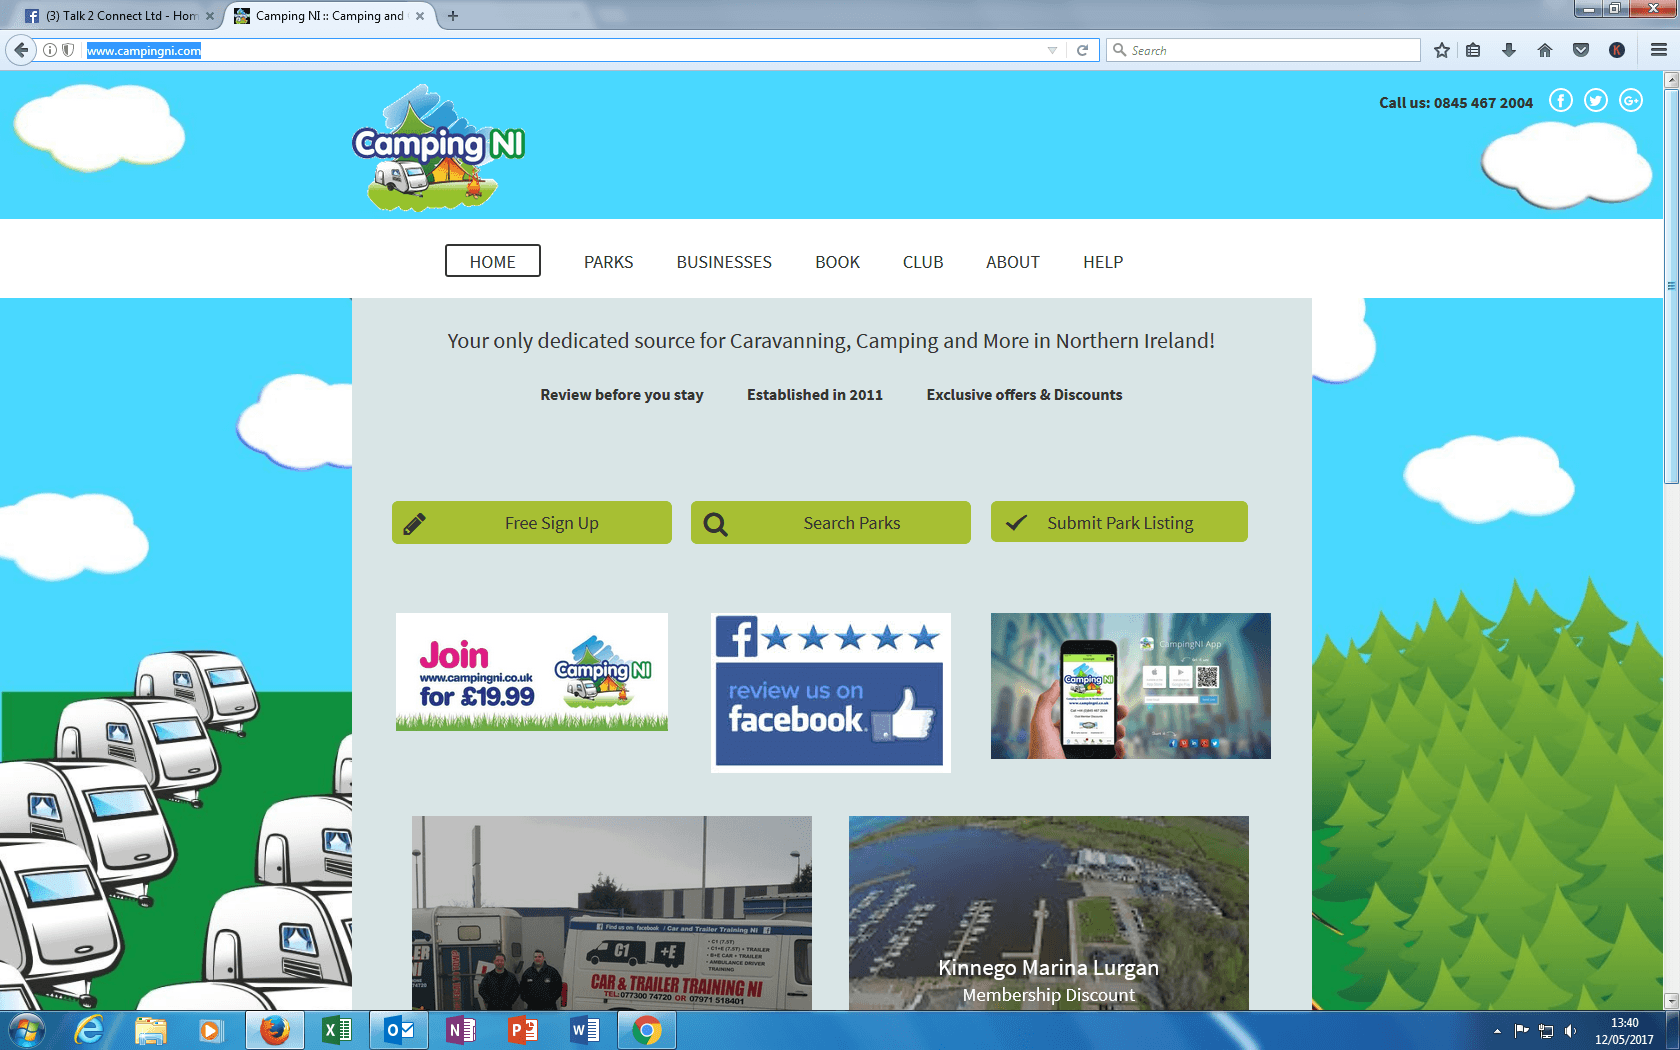 Campingni Website created by Talk 2 Connect